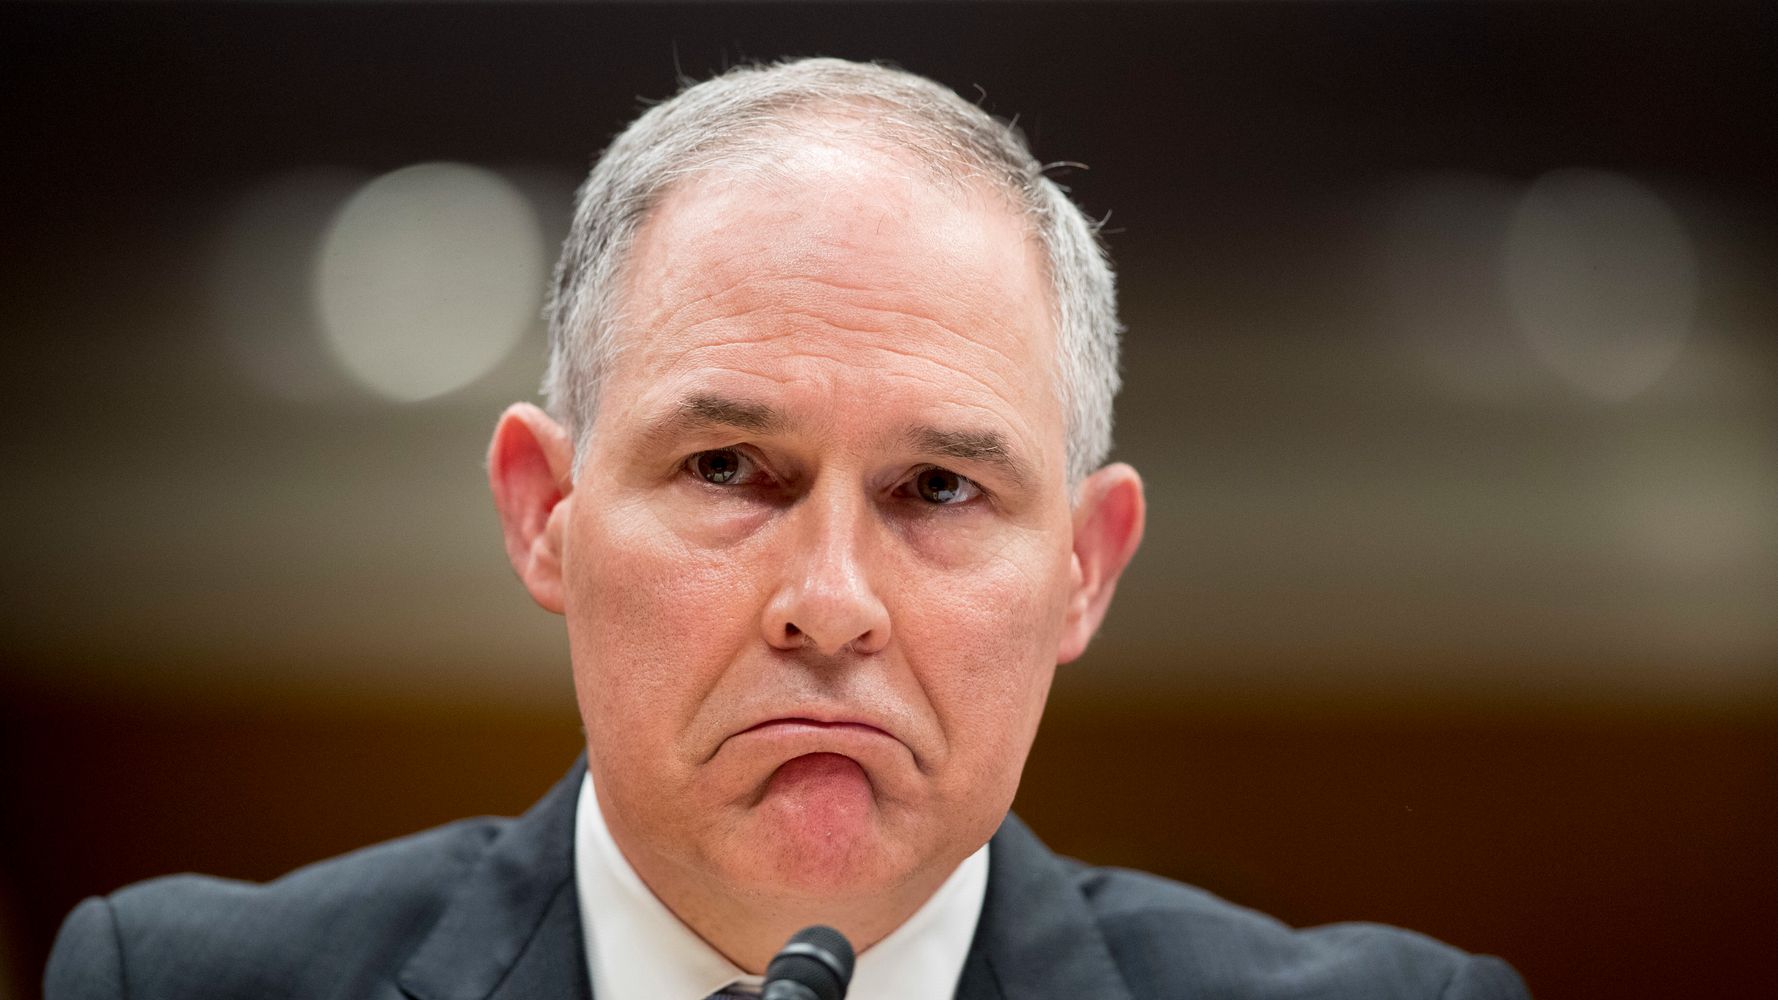 Former EPA Chief Had Security Drive Into Oncoming Traffic To Get Dry Cleaning